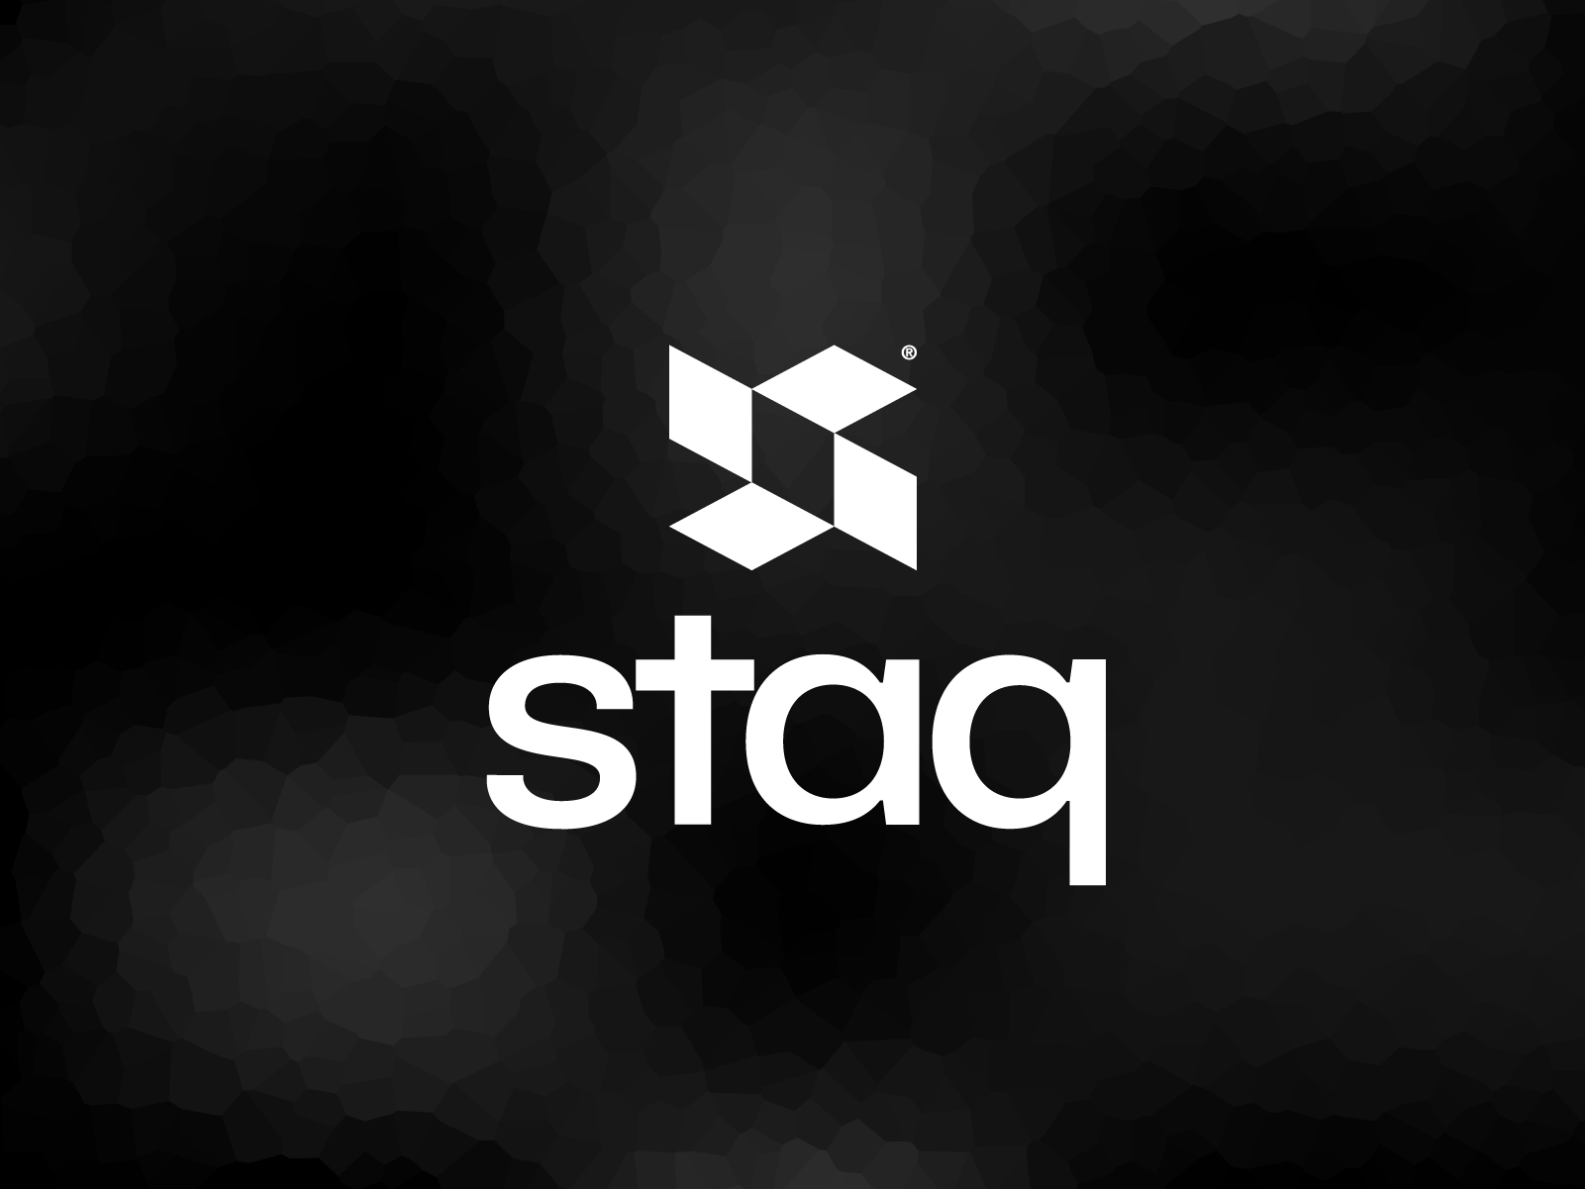 Staq by Patrick Tuell on Dribbble